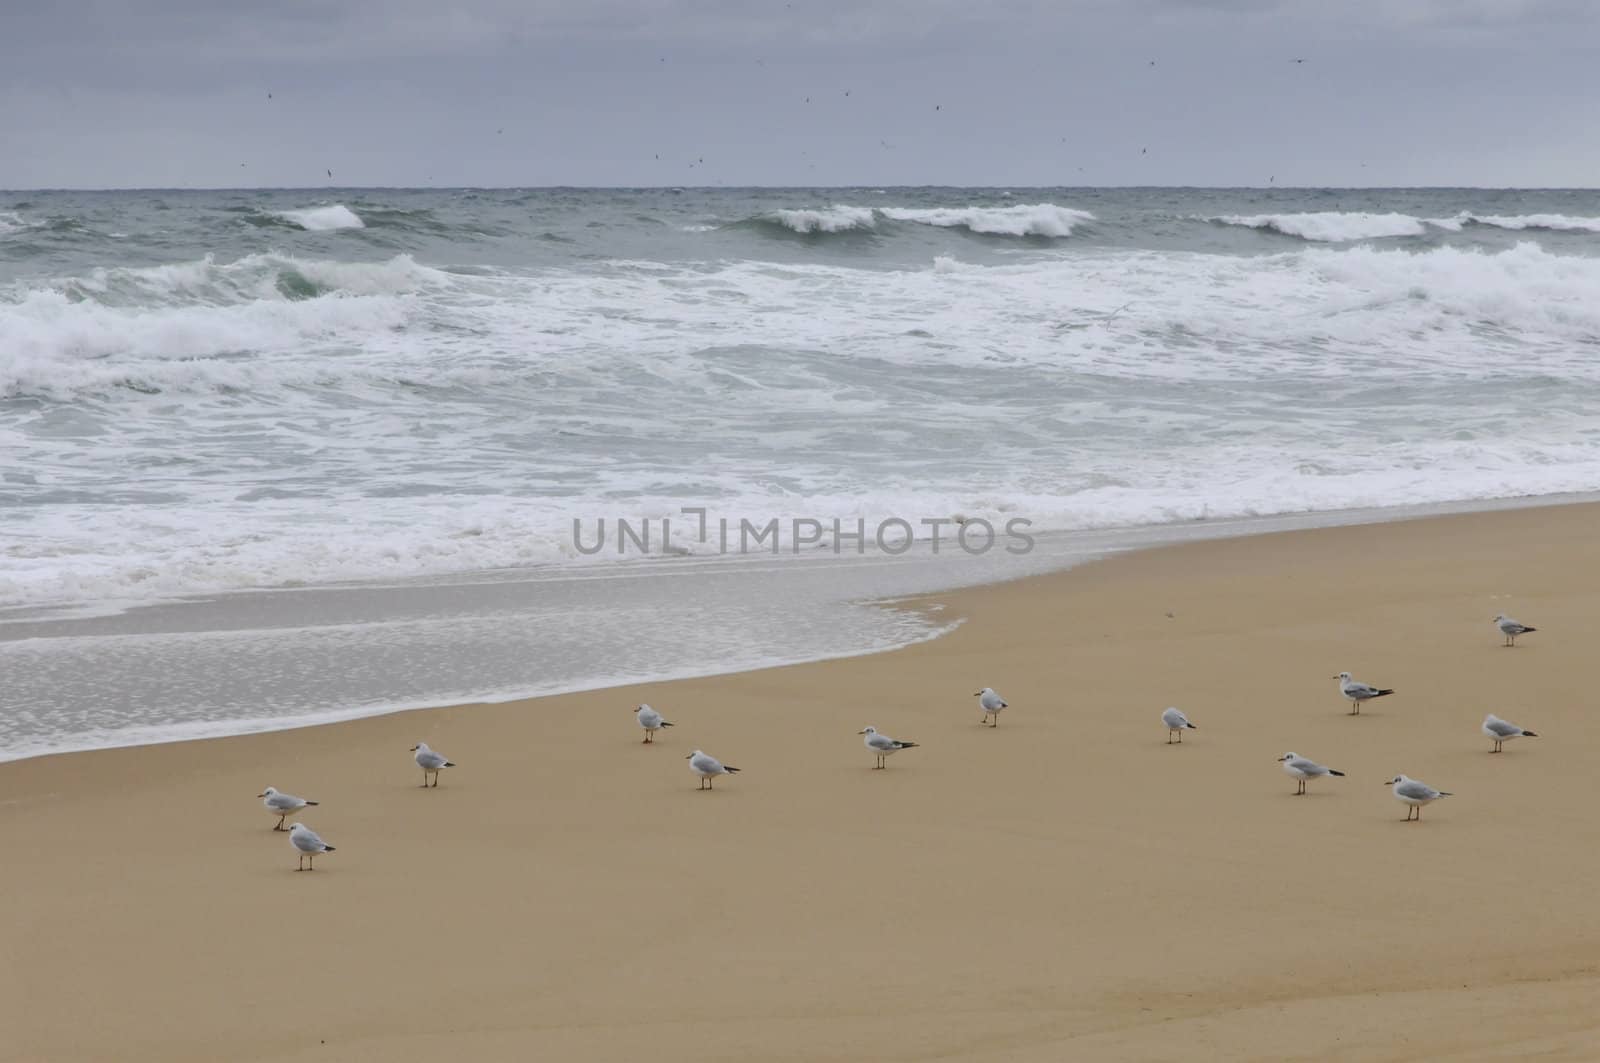 Some seagull on the beach with sea in background during a cloudy day